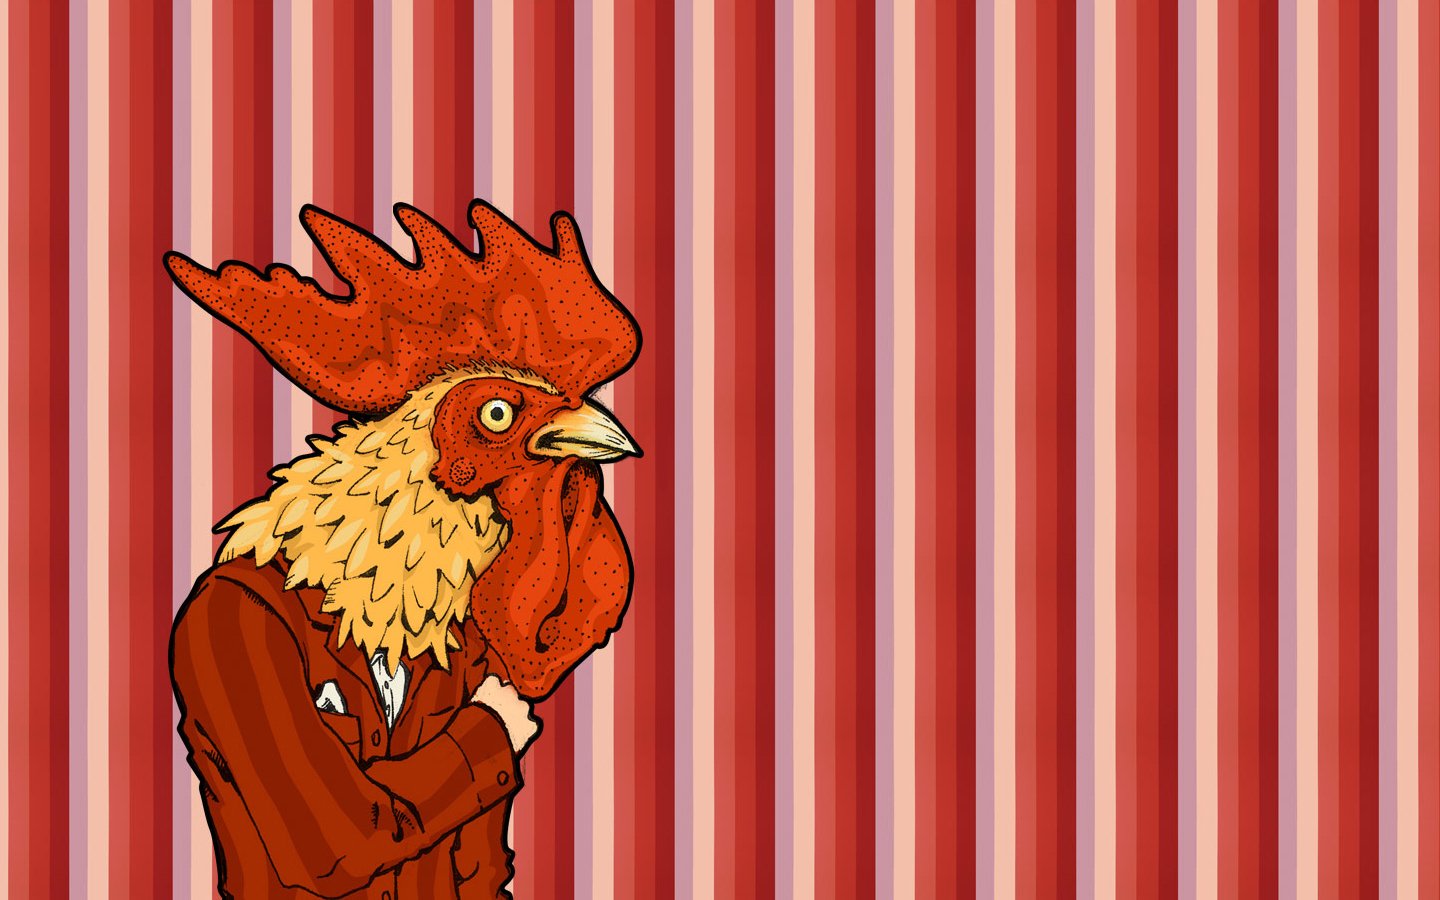 birds, Vectors, Chickens, Roosters, Stripes Wallpaper